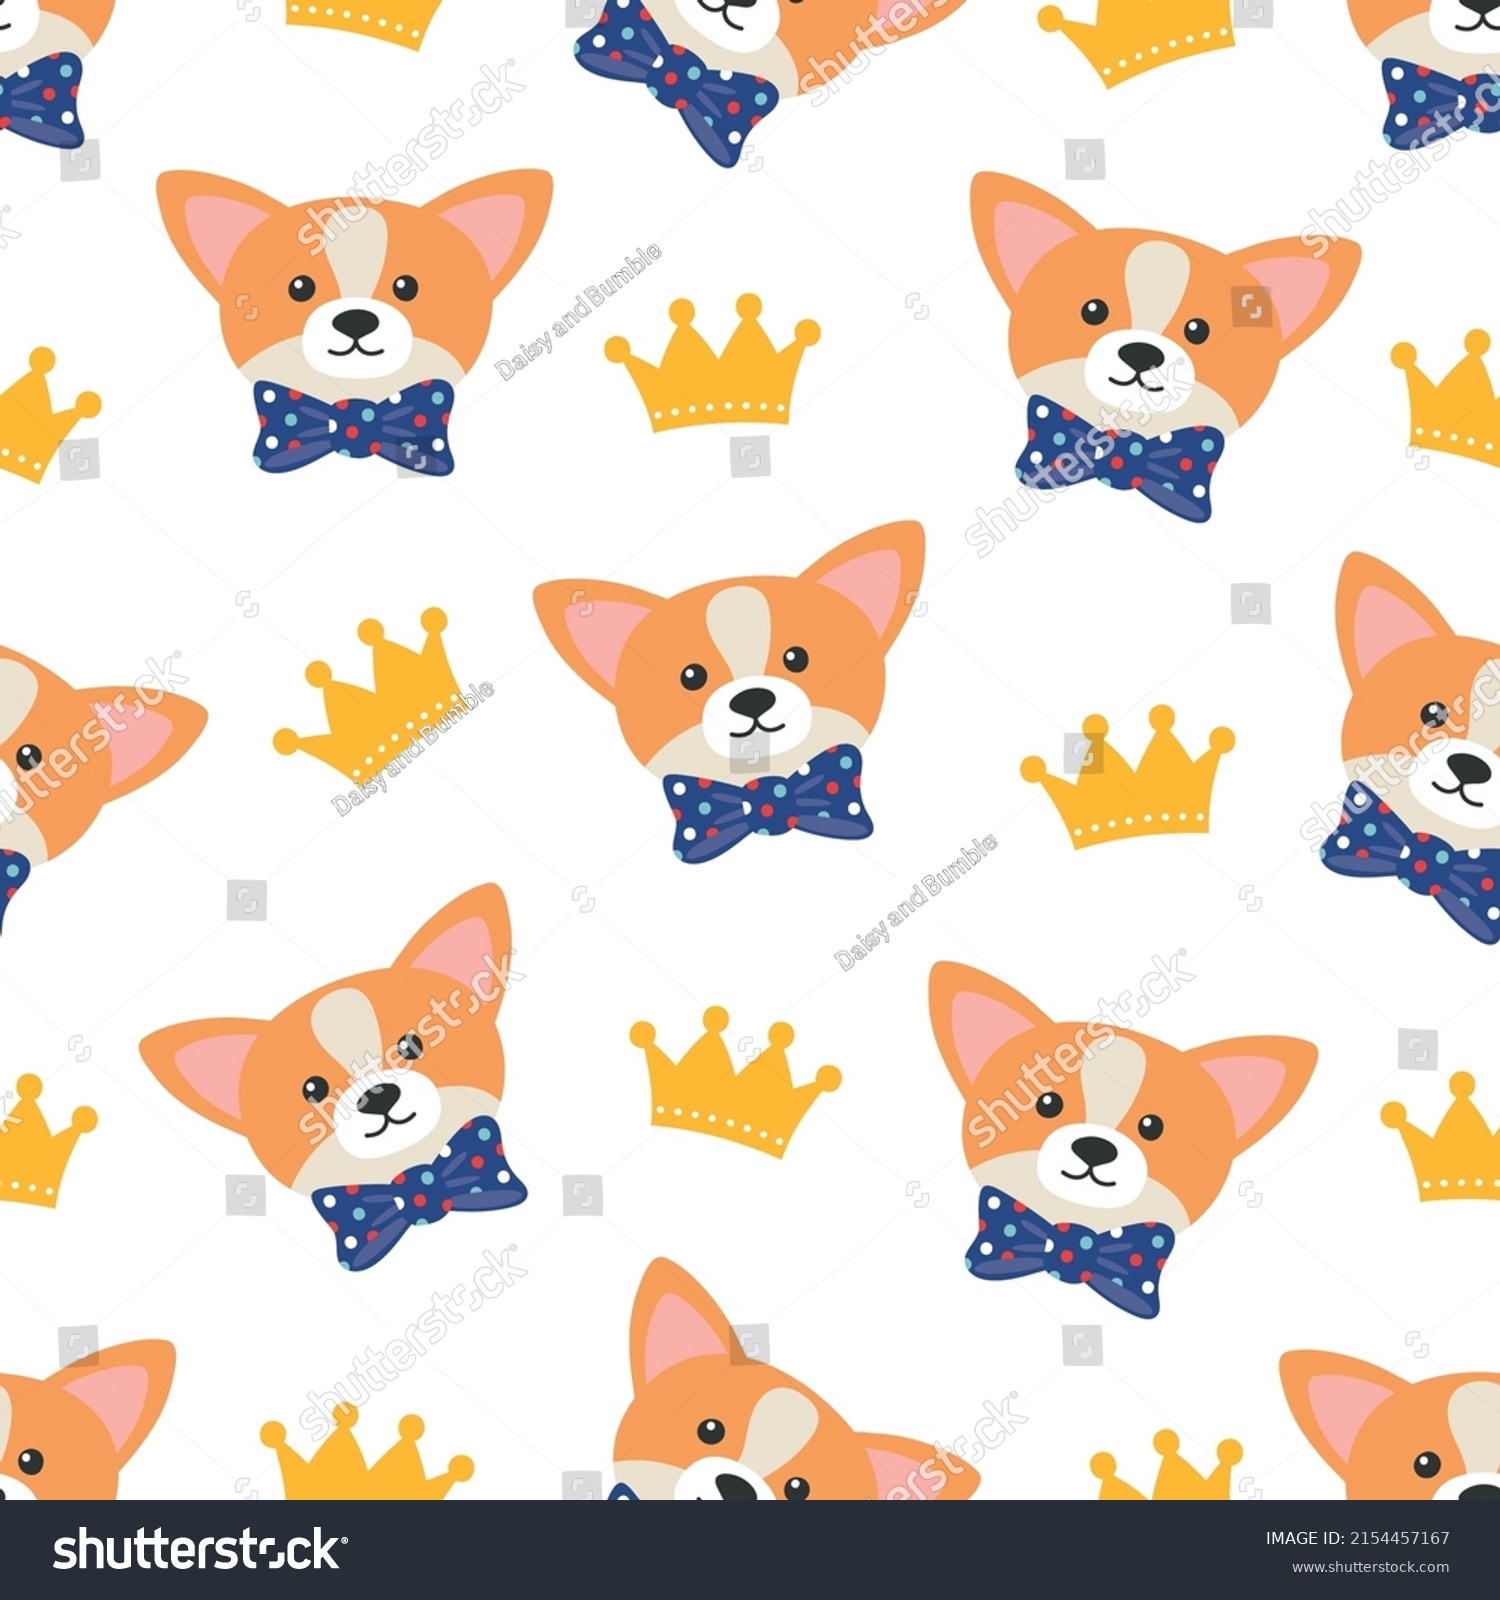 SVG of Royal Corgi Background seamless vector repeat pattern with crowns. Wallpaper, backdrop, red white and blue. svg